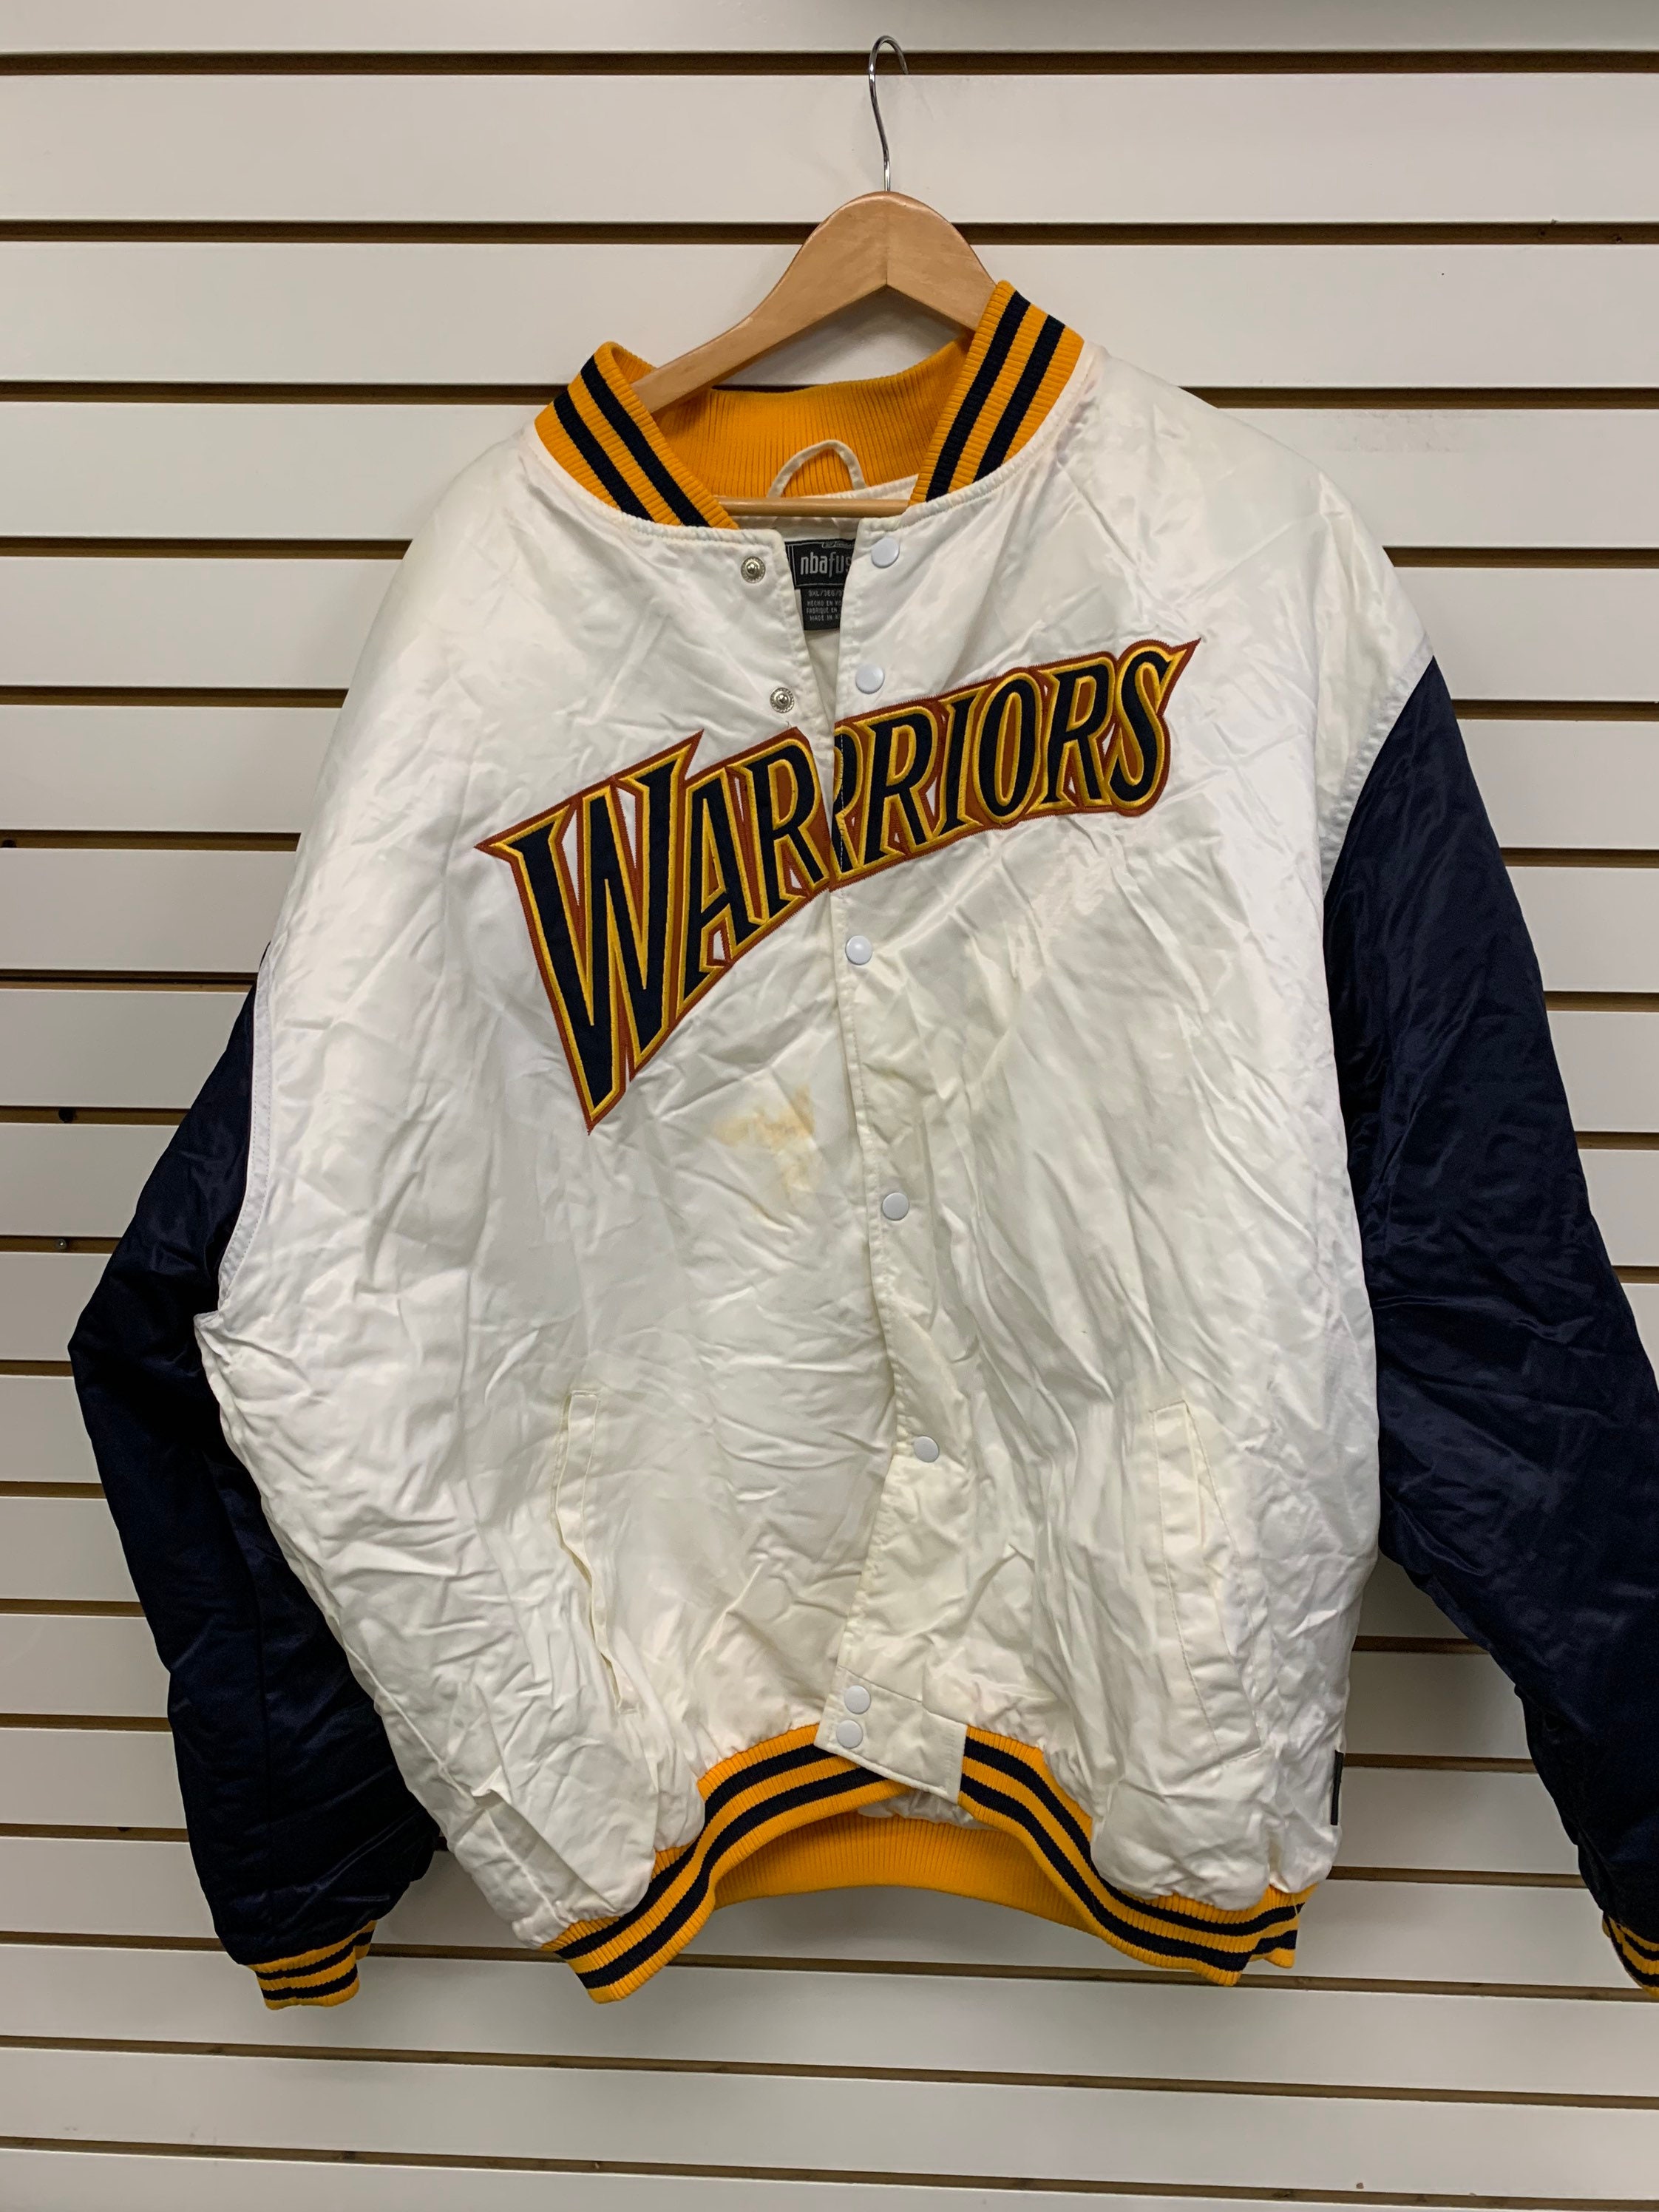 LegacyVintage99 Vintage Golden State Warriors NBA 1980s 80s T Shirt Trench San Francisco California Made USA Basketball Brand New Old Stock Original Classic